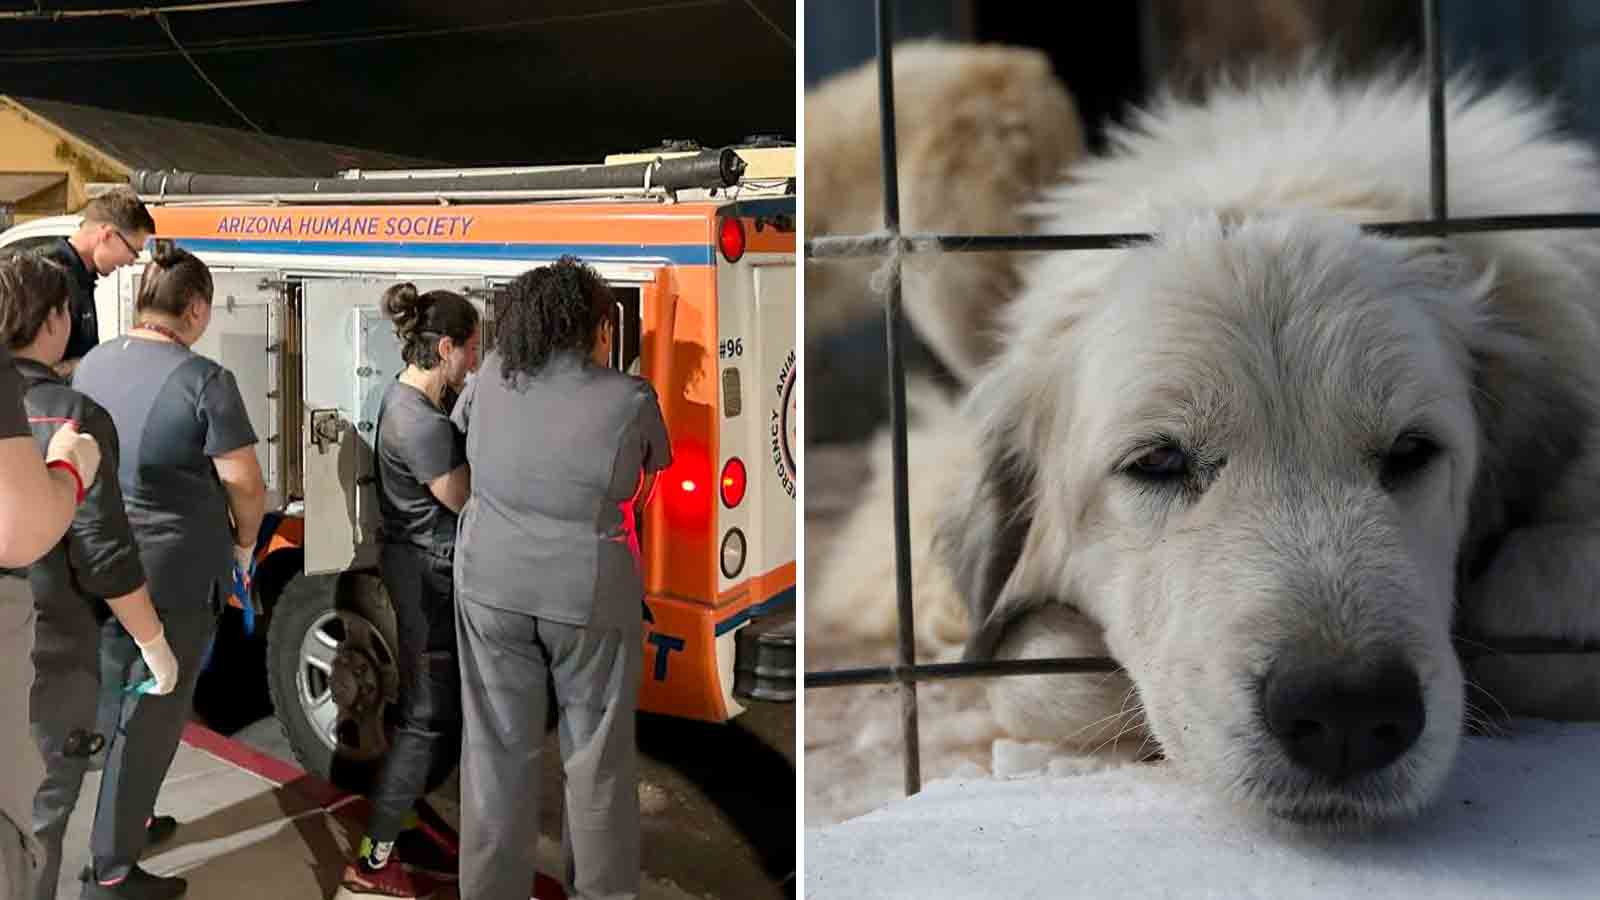 side by side image of workers from Arizona Humane Society and a puppy....